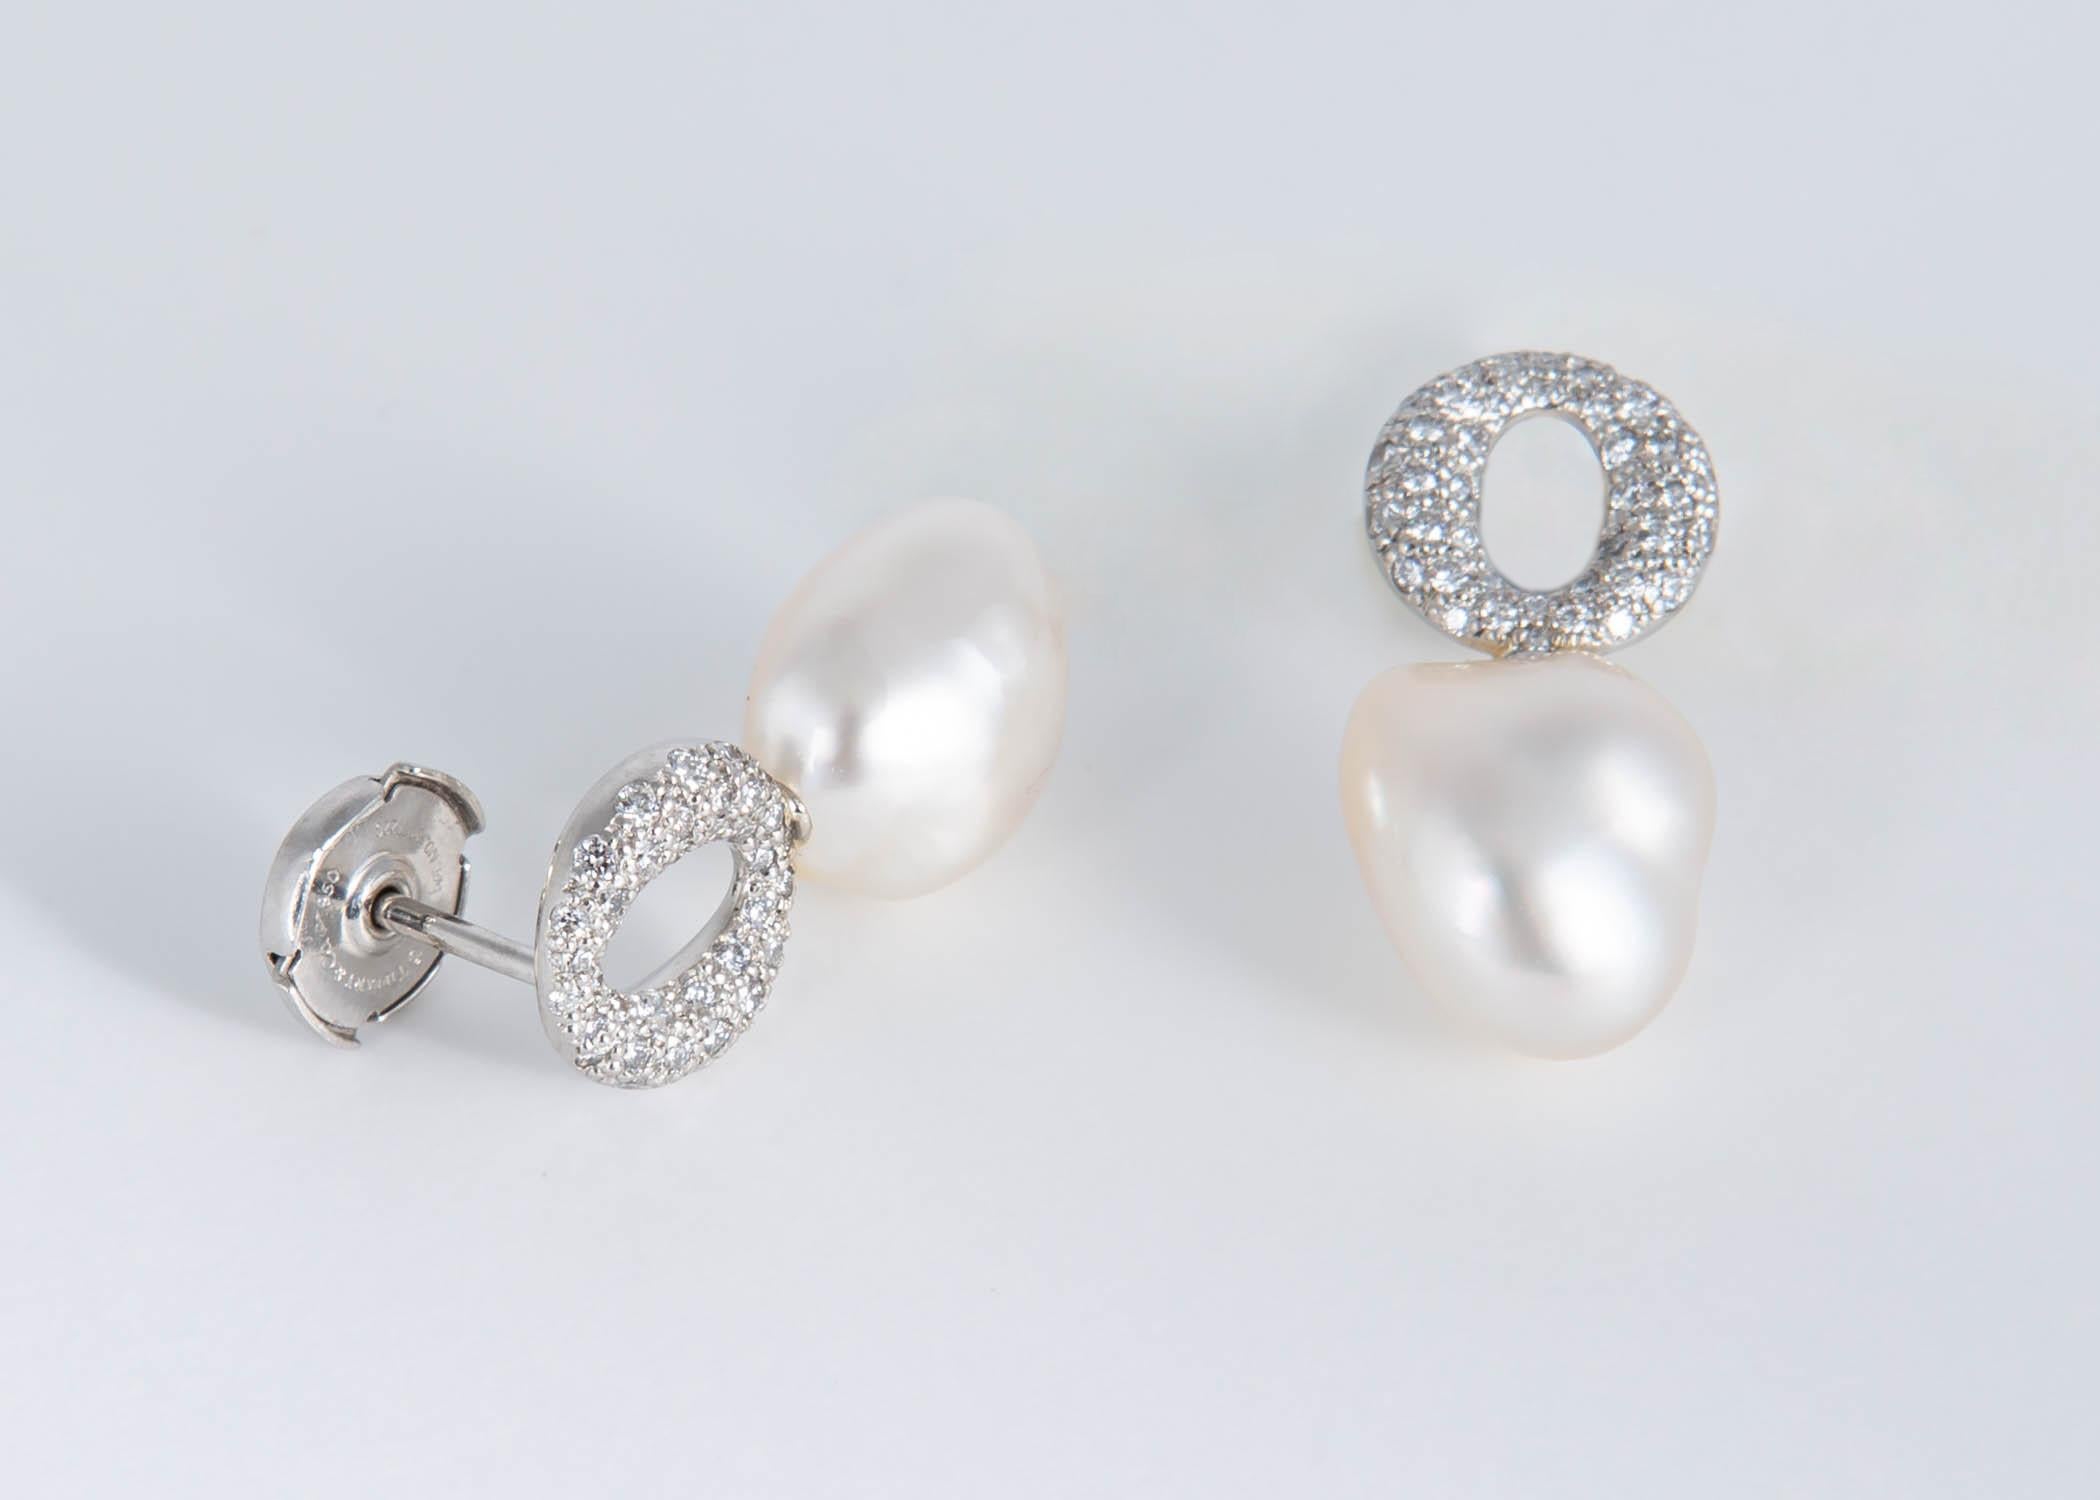 Elsa Peretti has created pure simple designs that are todays classics. This pair of earrings begin with pure platinum and brilliant cut diamonds and feature rare keshi pearls. Keshi pearls are natural and a rare gift of nature. This wearable unique